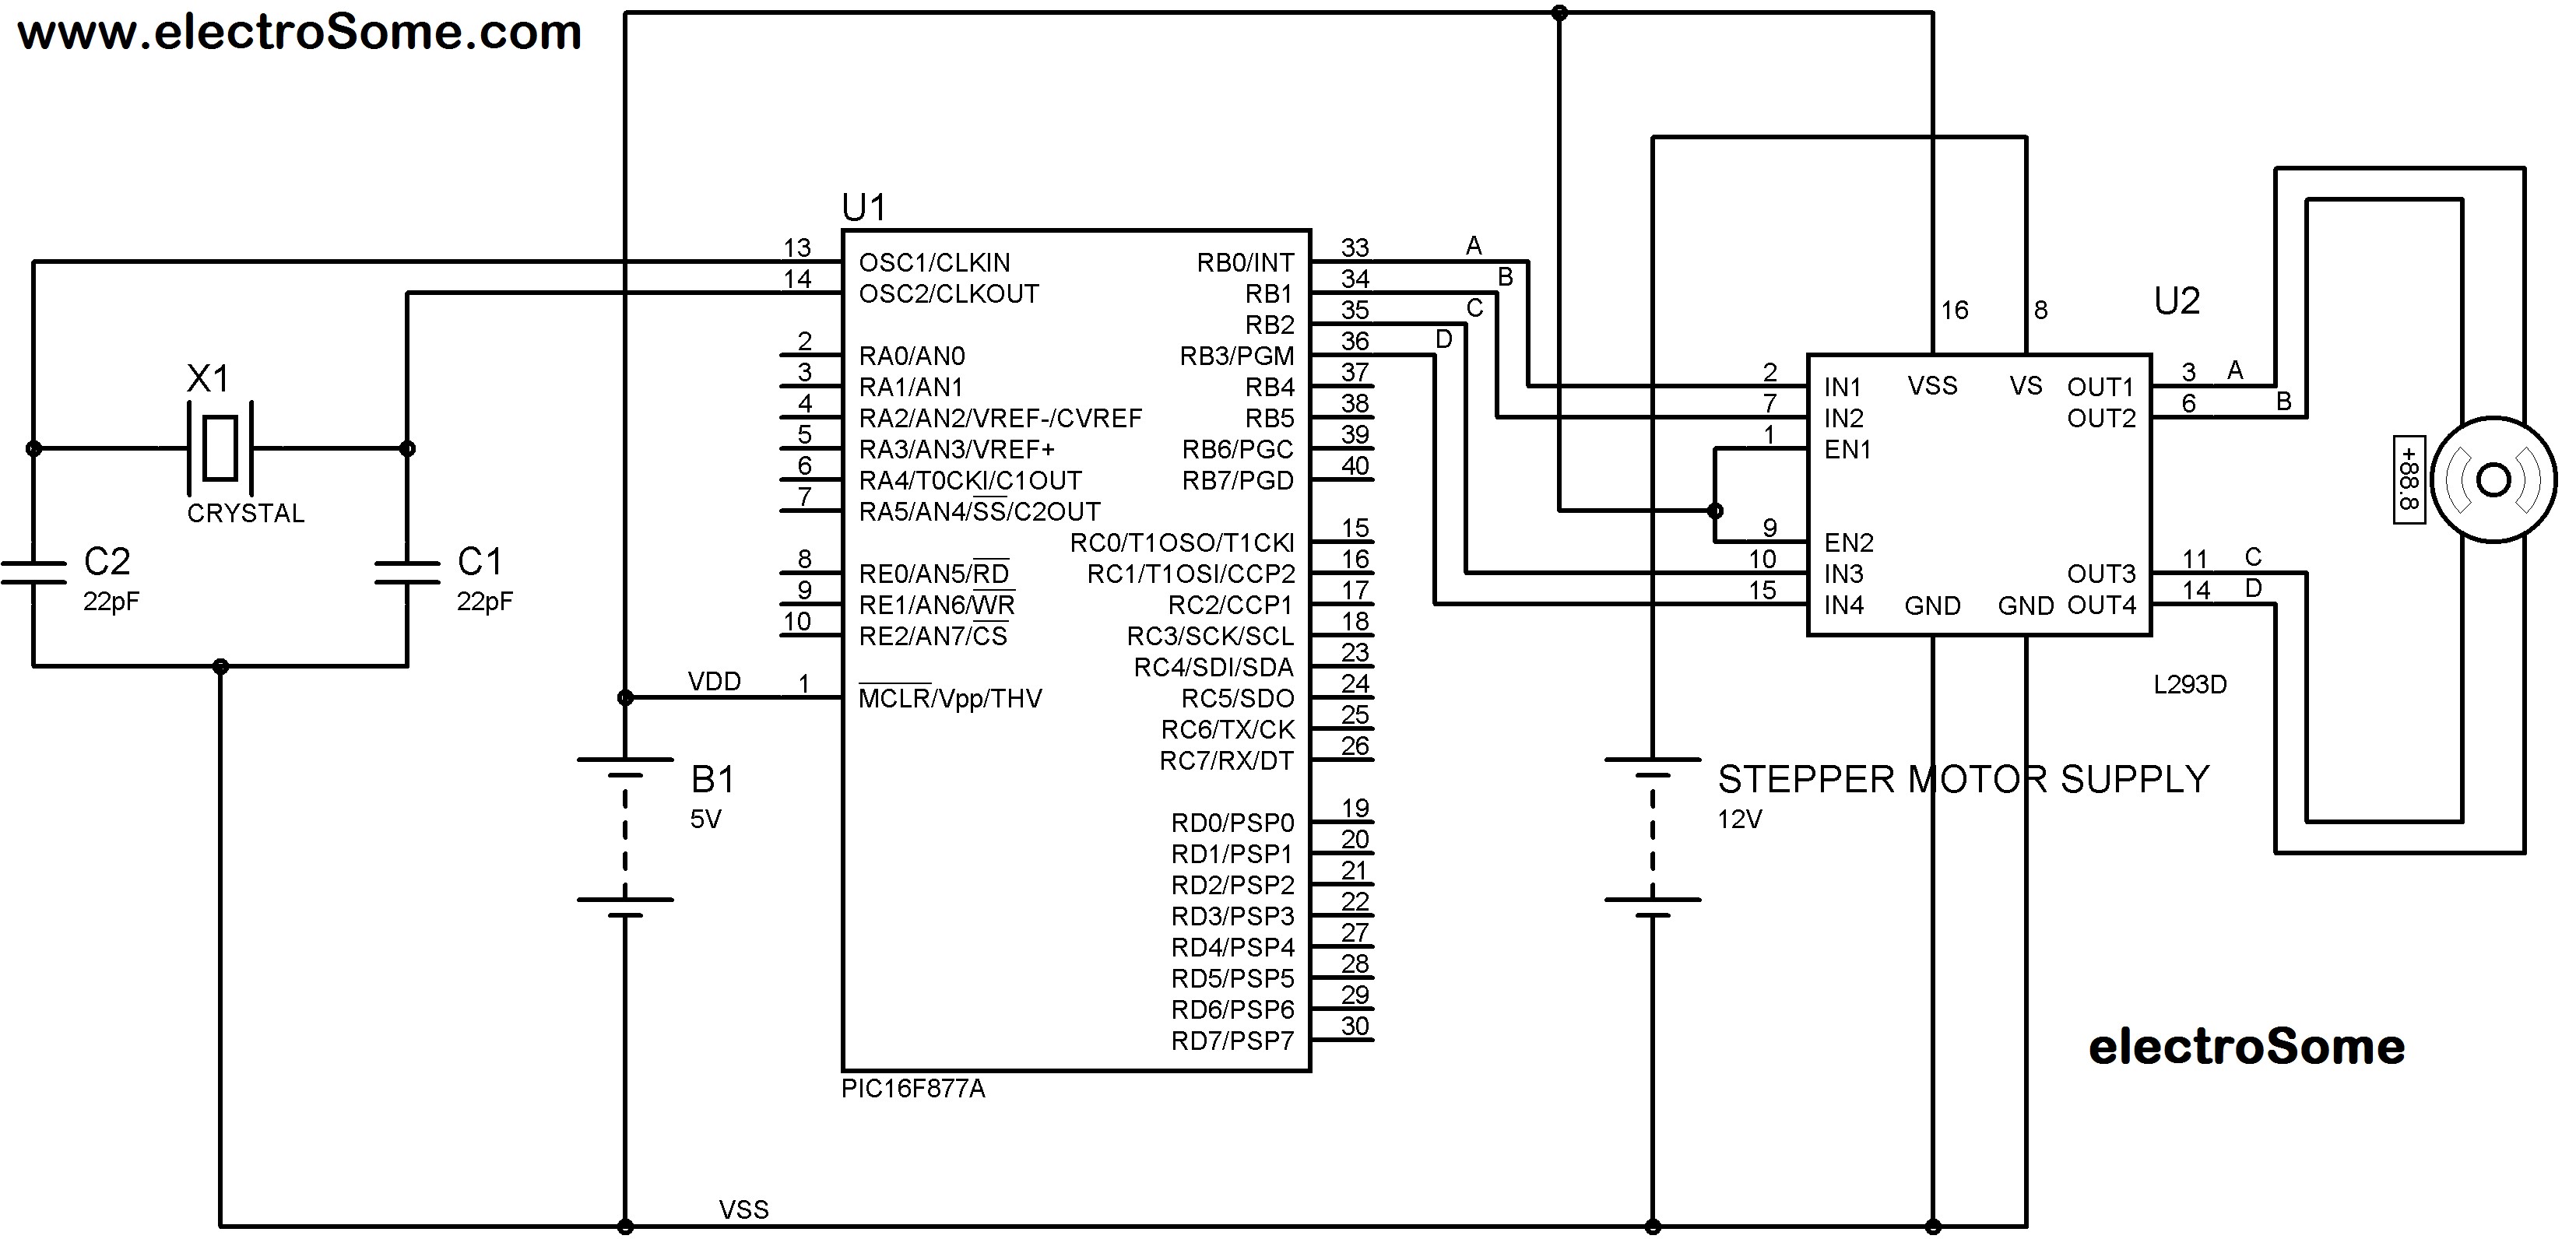 Stepper Motor Wiring Diagram Interfacing Stepper Motor with Pic Microcontroller Mikroc Bipolar Of Stepper Motor Wiring Diagram